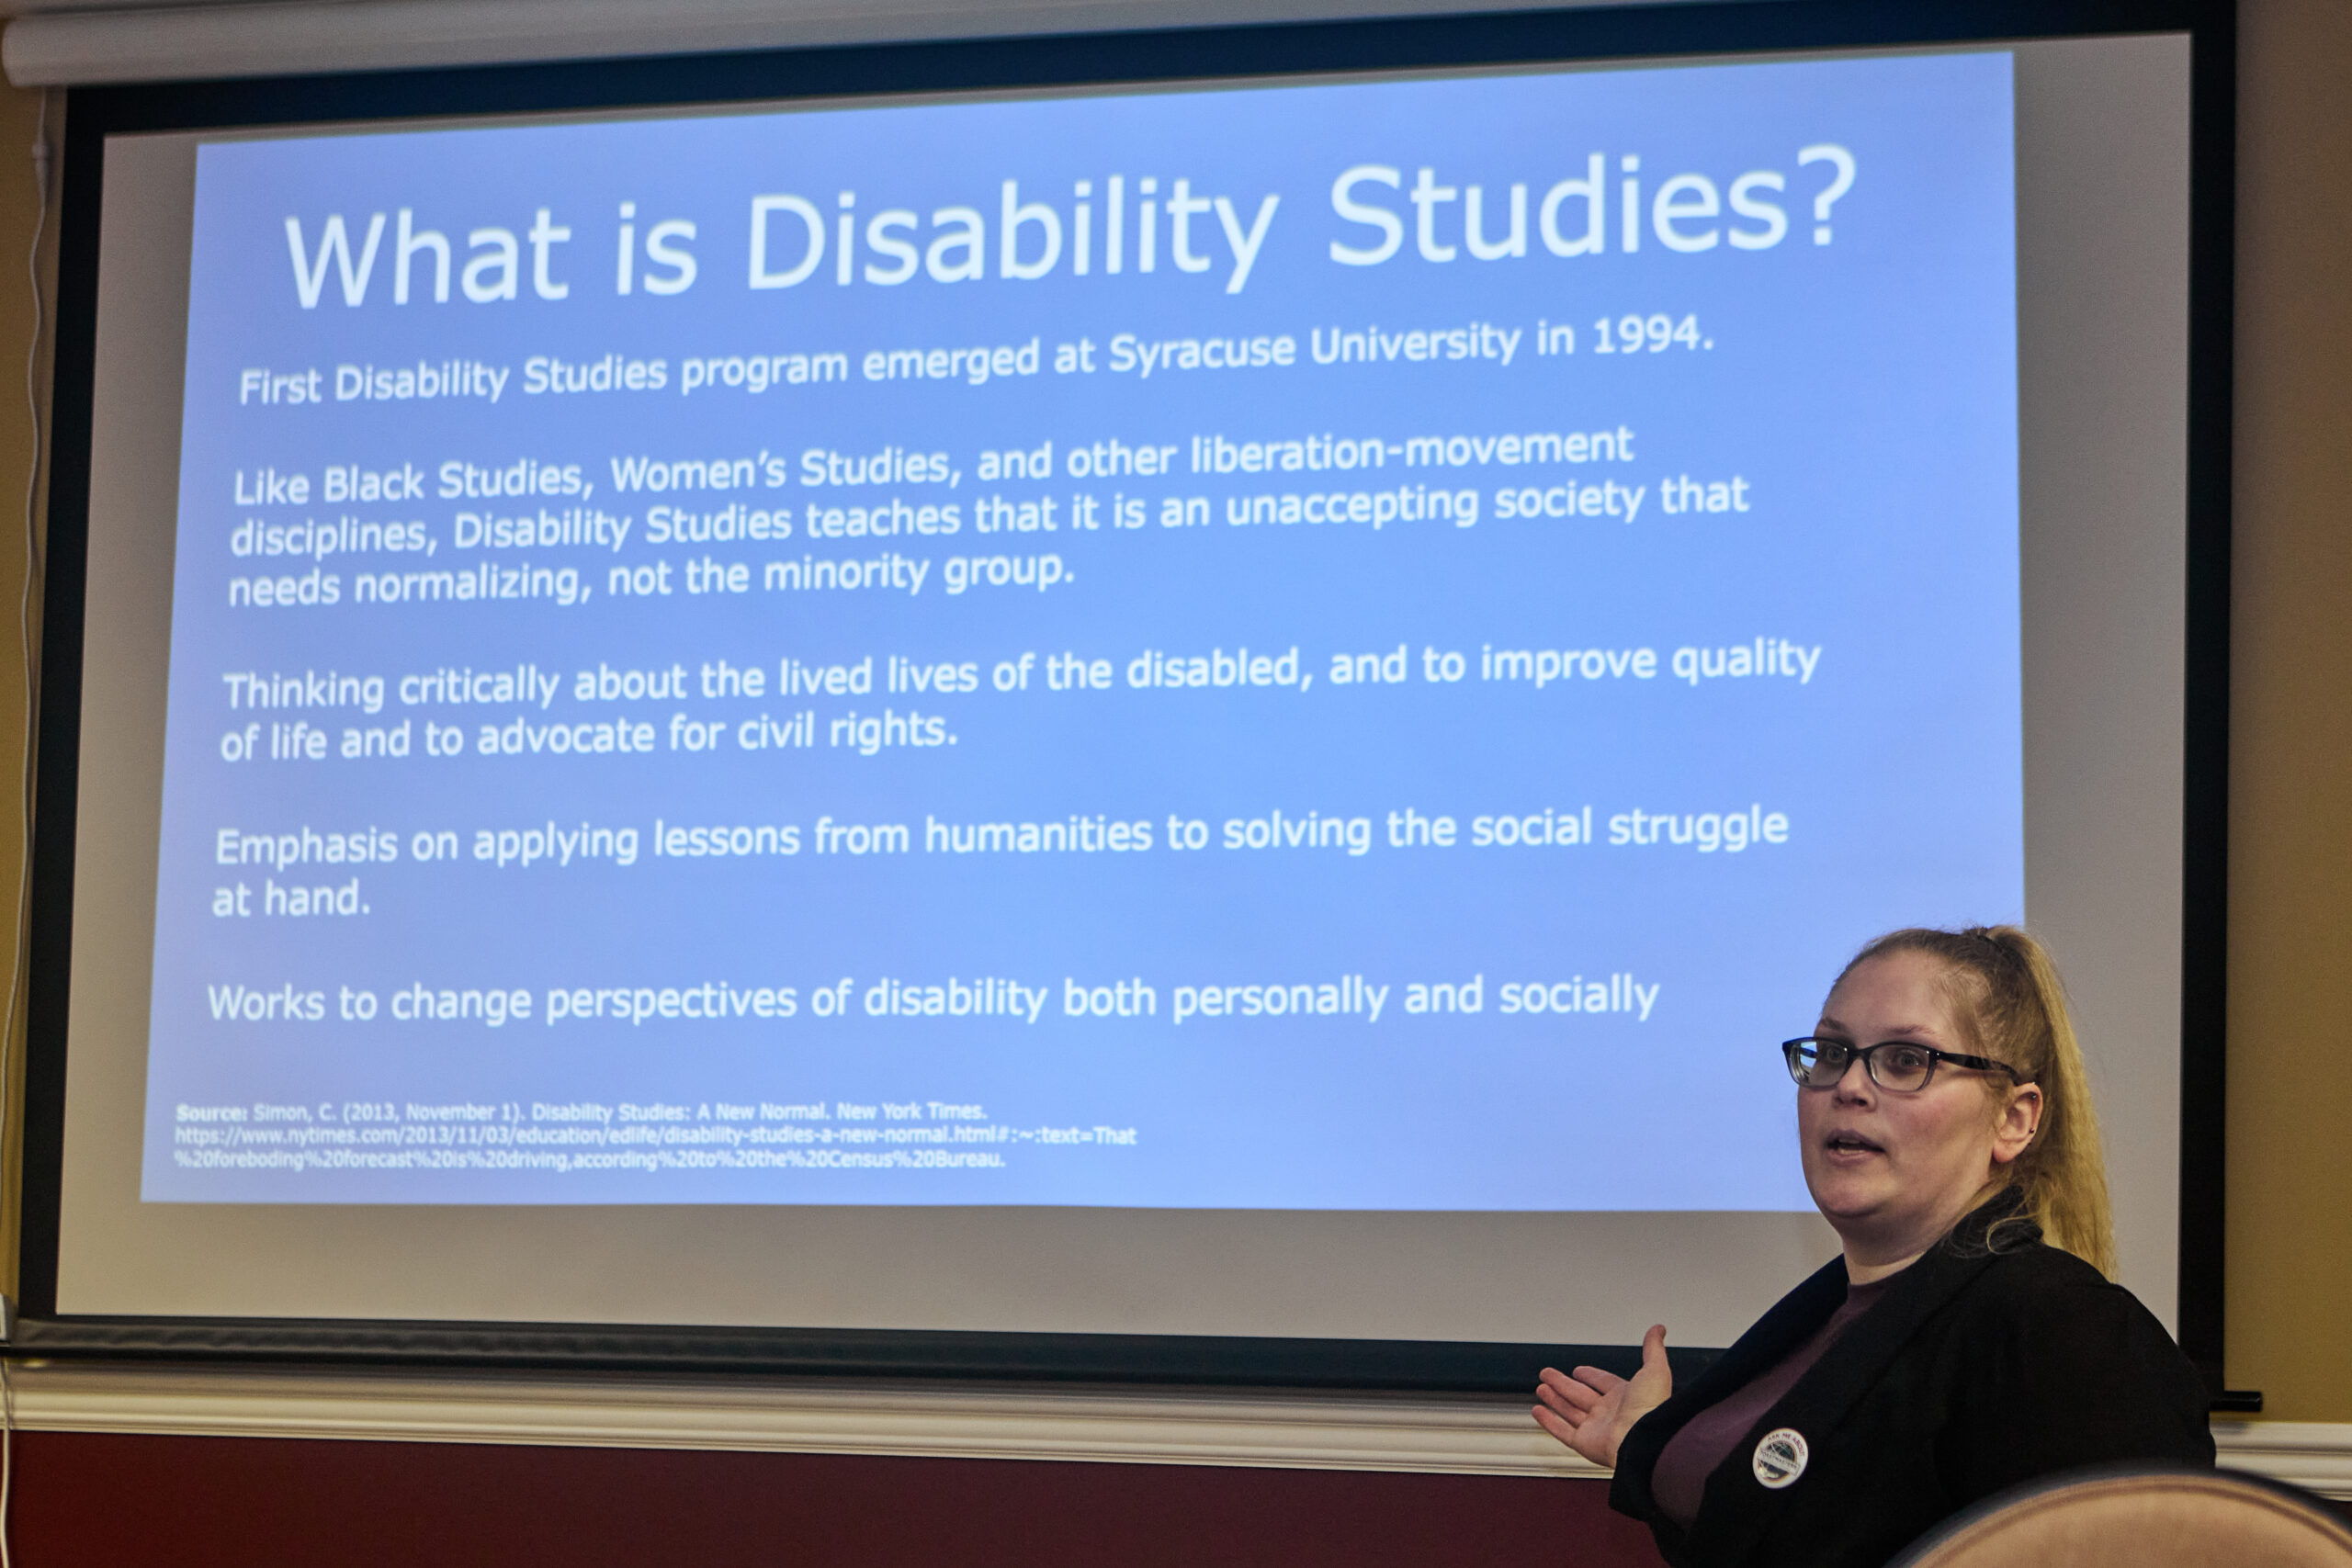 [Image description: Former Ms. Wheelchair Pennsylvania 2018, Barb Zablotney, sitting in front of a screen projecting an explanation of disability studies.]